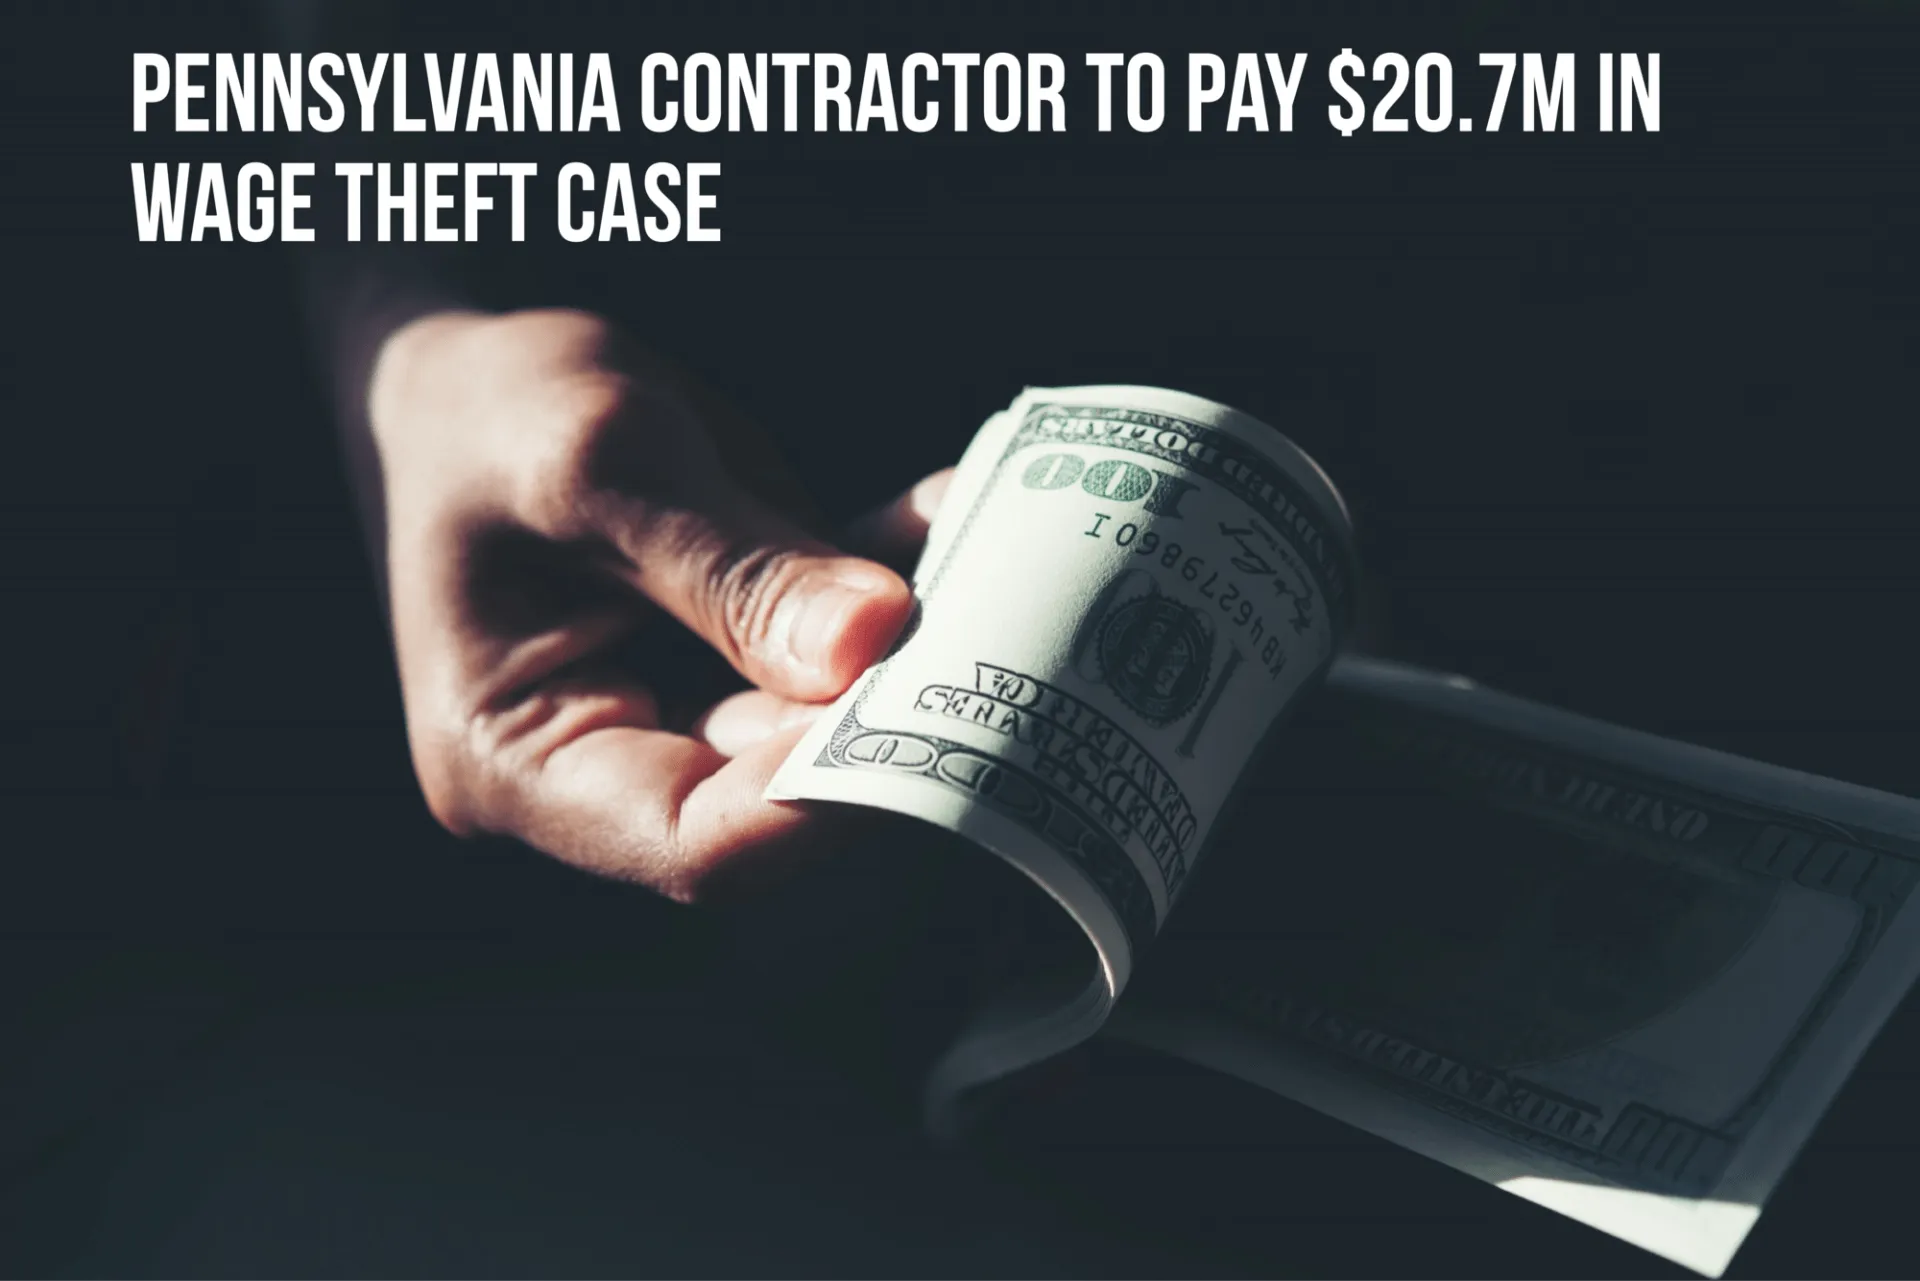 Pennsylvania Contractor to Pay $ In Wage Theft Case